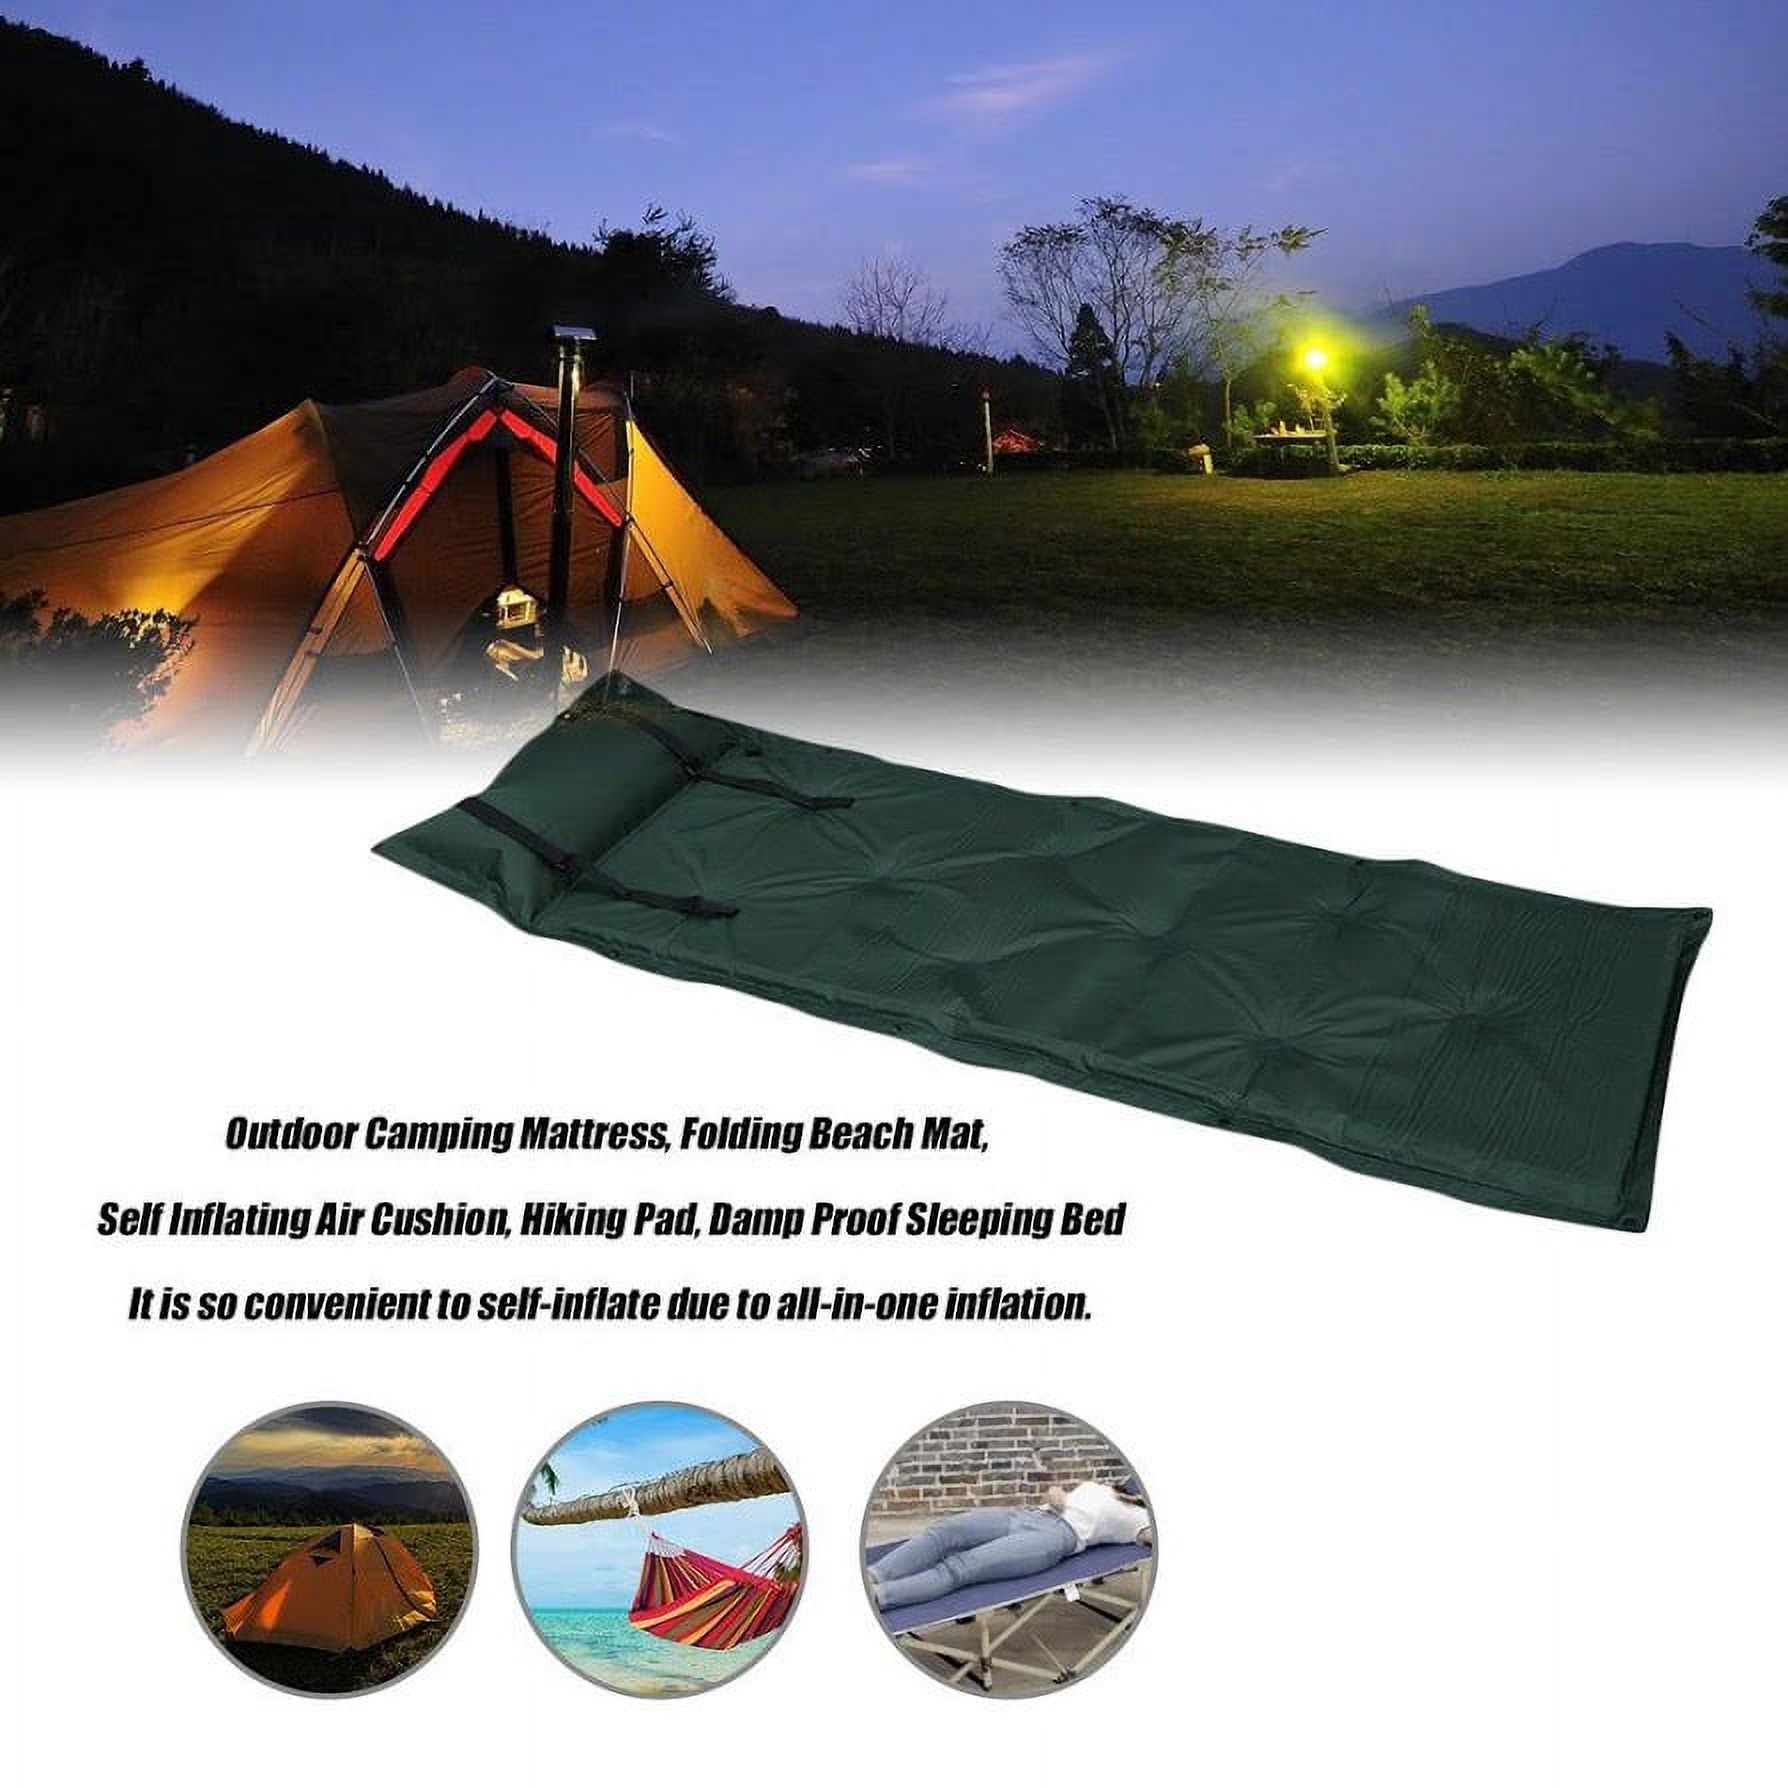 Self Inflating Sleeping Pad Camping Pad Connectable Waterproof Camping matches Designed for Tent Green - image 3 of 6